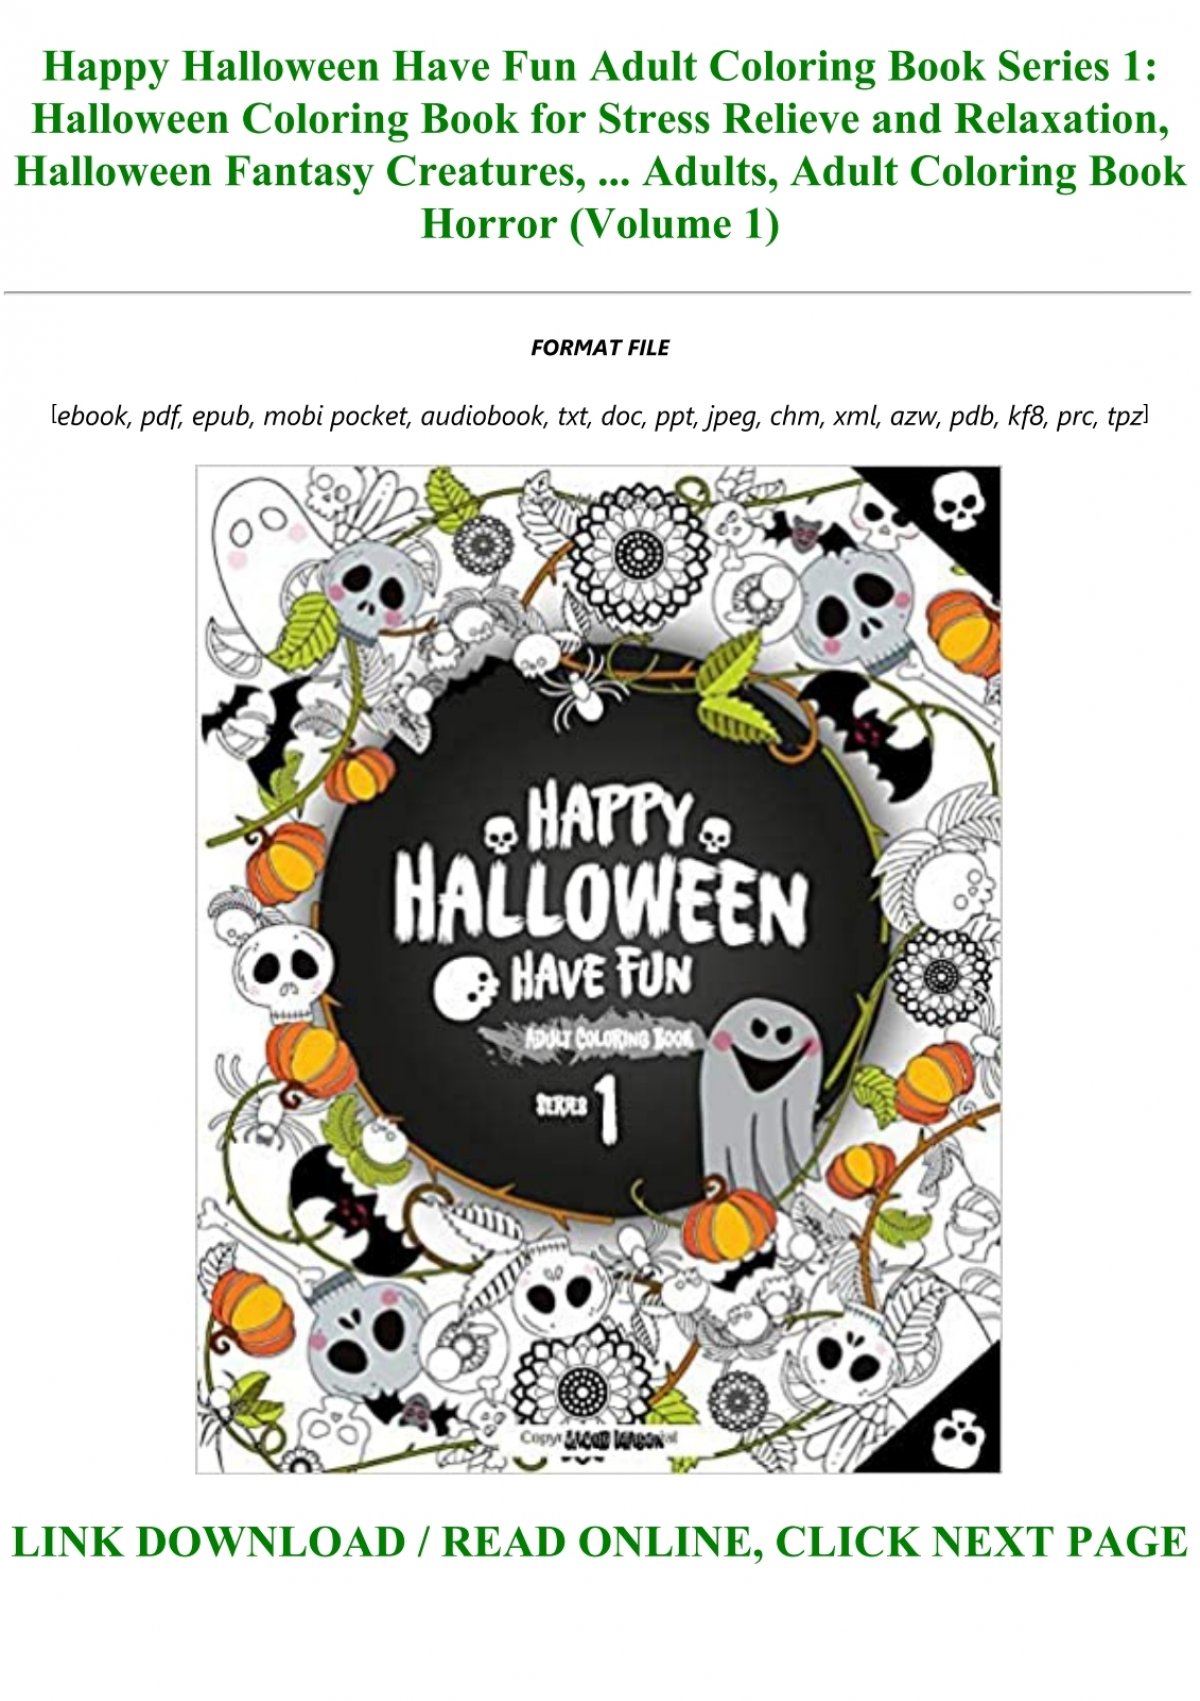 Download Free Download Happy Halloween Have Fun Adult Coloring Book Series 1 Halloween Coloring Book For Stress Relieve And Relaxation Halloween Fantasy Creatures Adults Adult Coloring Book Horror Volume 1 Full